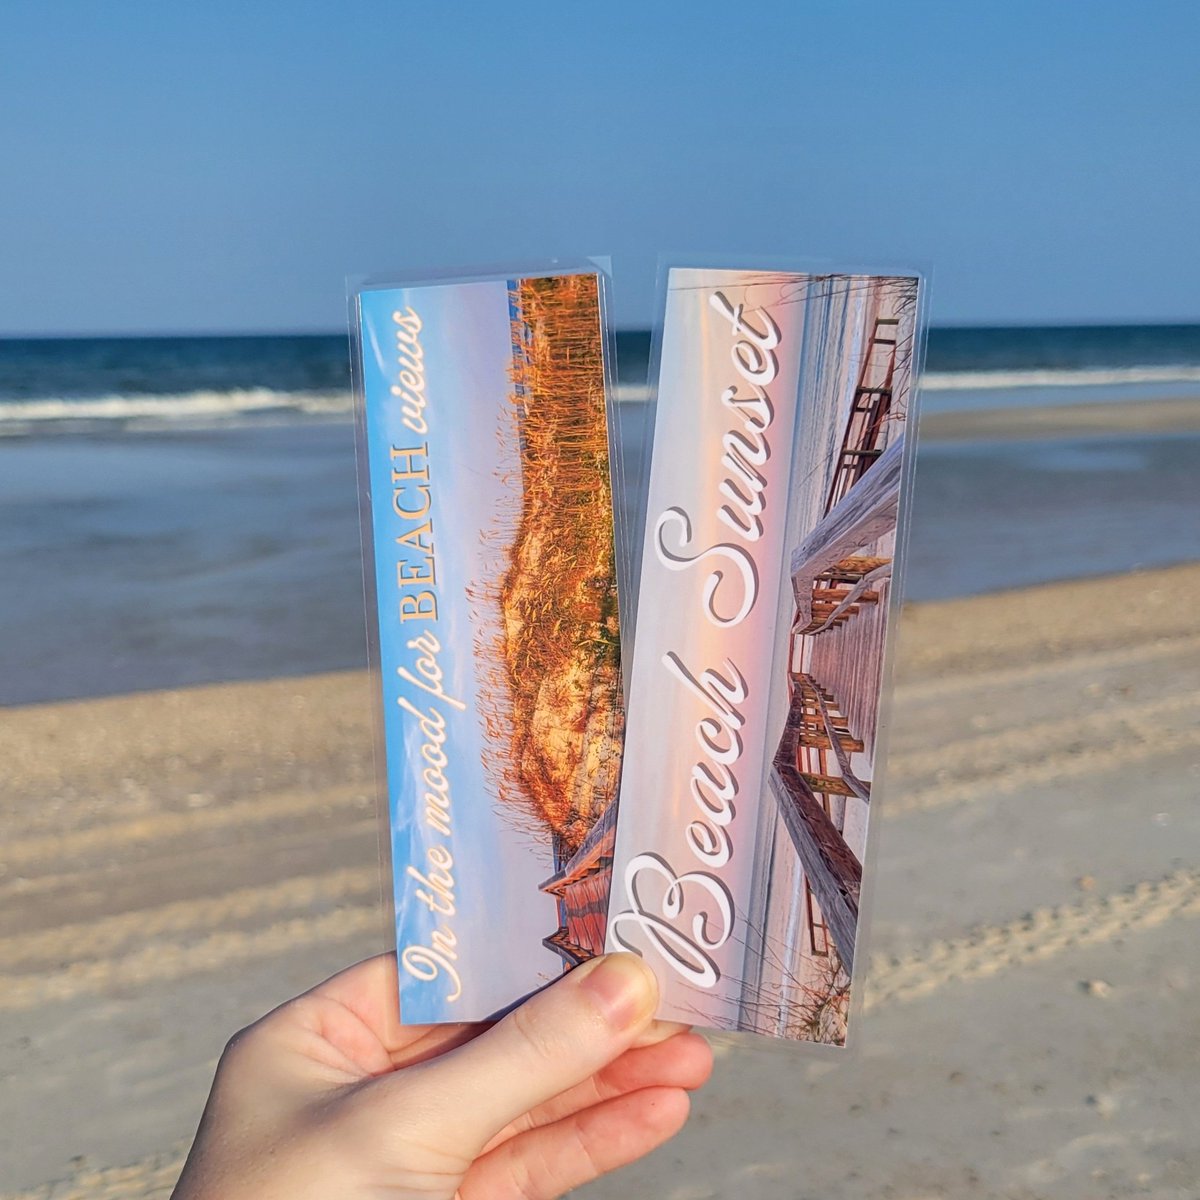 Beach photo bookmarks 🌅 10% Off + Free Shipping • Shop -> etsy.com/listing/173880…

#bookmark #bookaddict #books #booklovers #bookish #reading #readercommunity #readers #sunsetphotography #sunsets #sunset #beaches #Beachreads #beach #vacation #travel #weekend #etsyshopping #cute